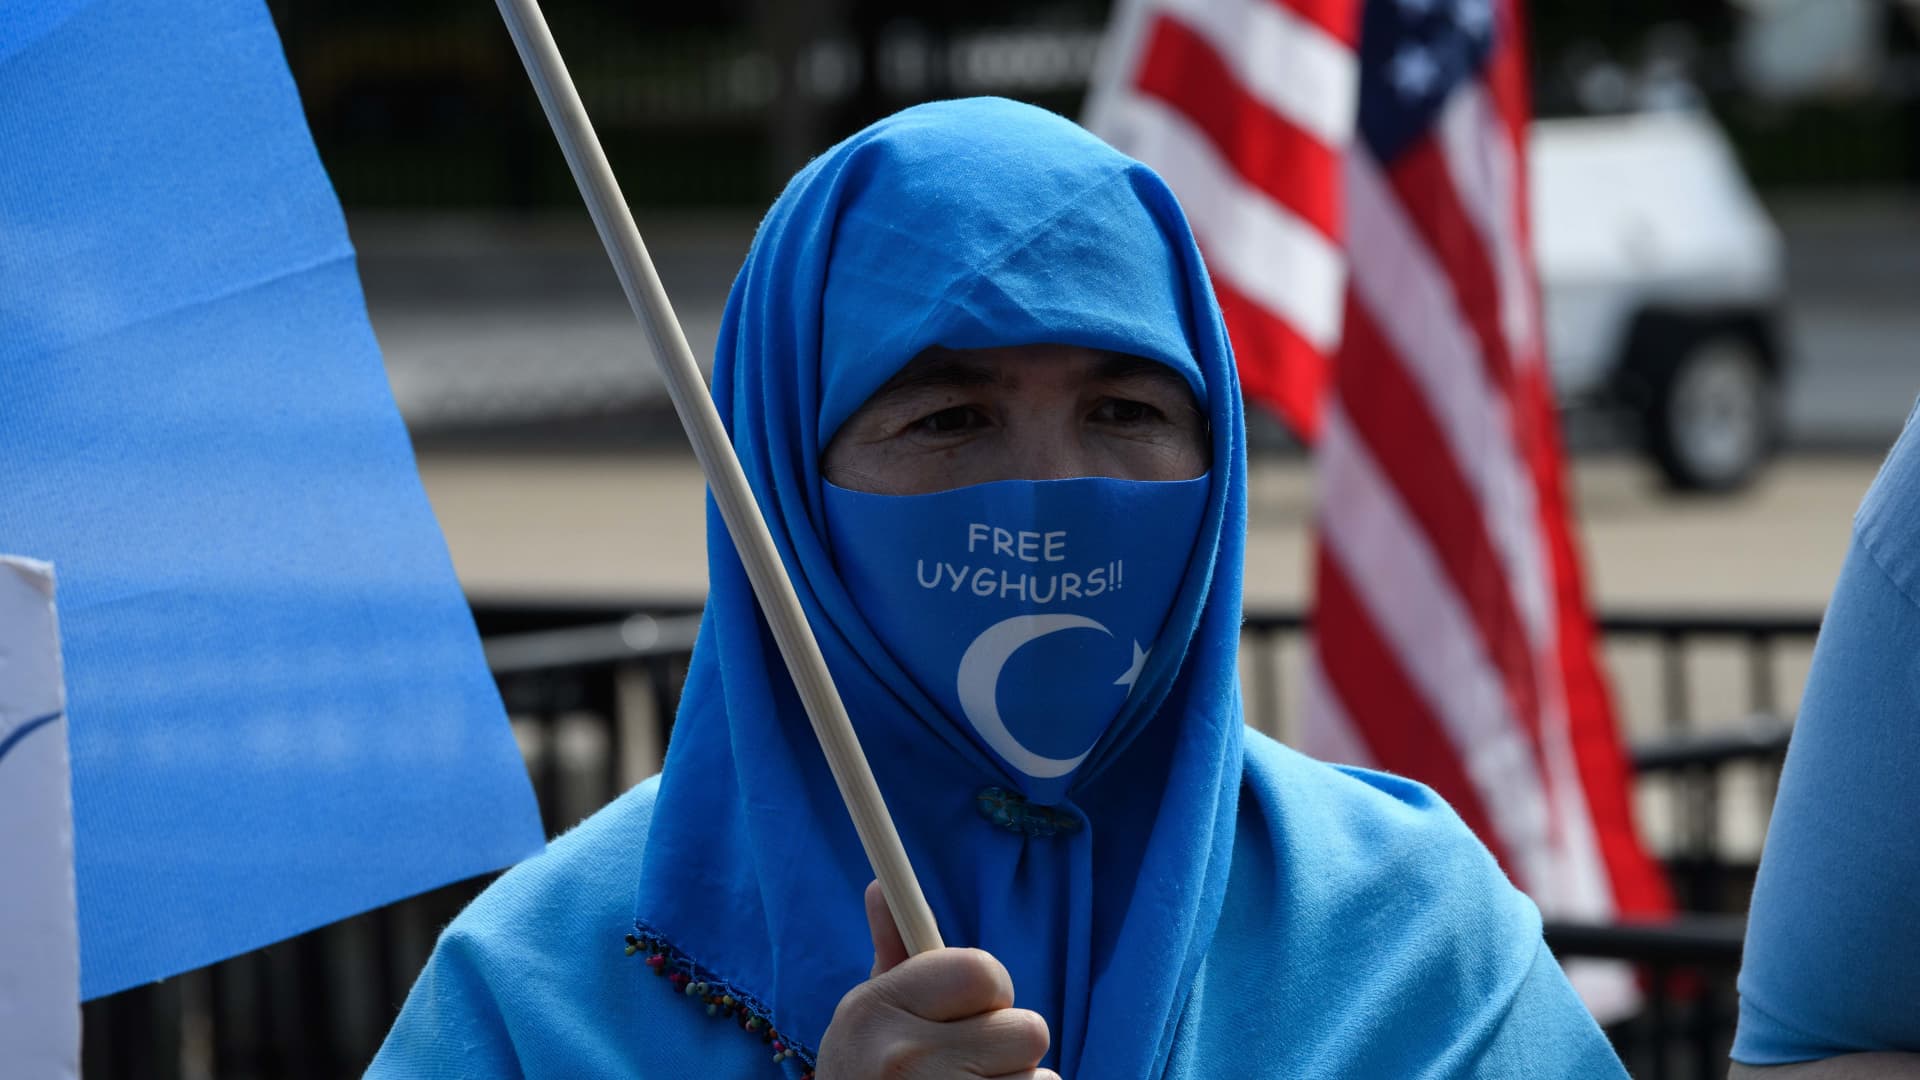 Uyghurs of the East Turkistan National Awakening Movement (ETNAM) hold a rally to protest the 71st anniversary of the People's Republic of China in front of the White House in Washington, DC, on October 1, 2020.